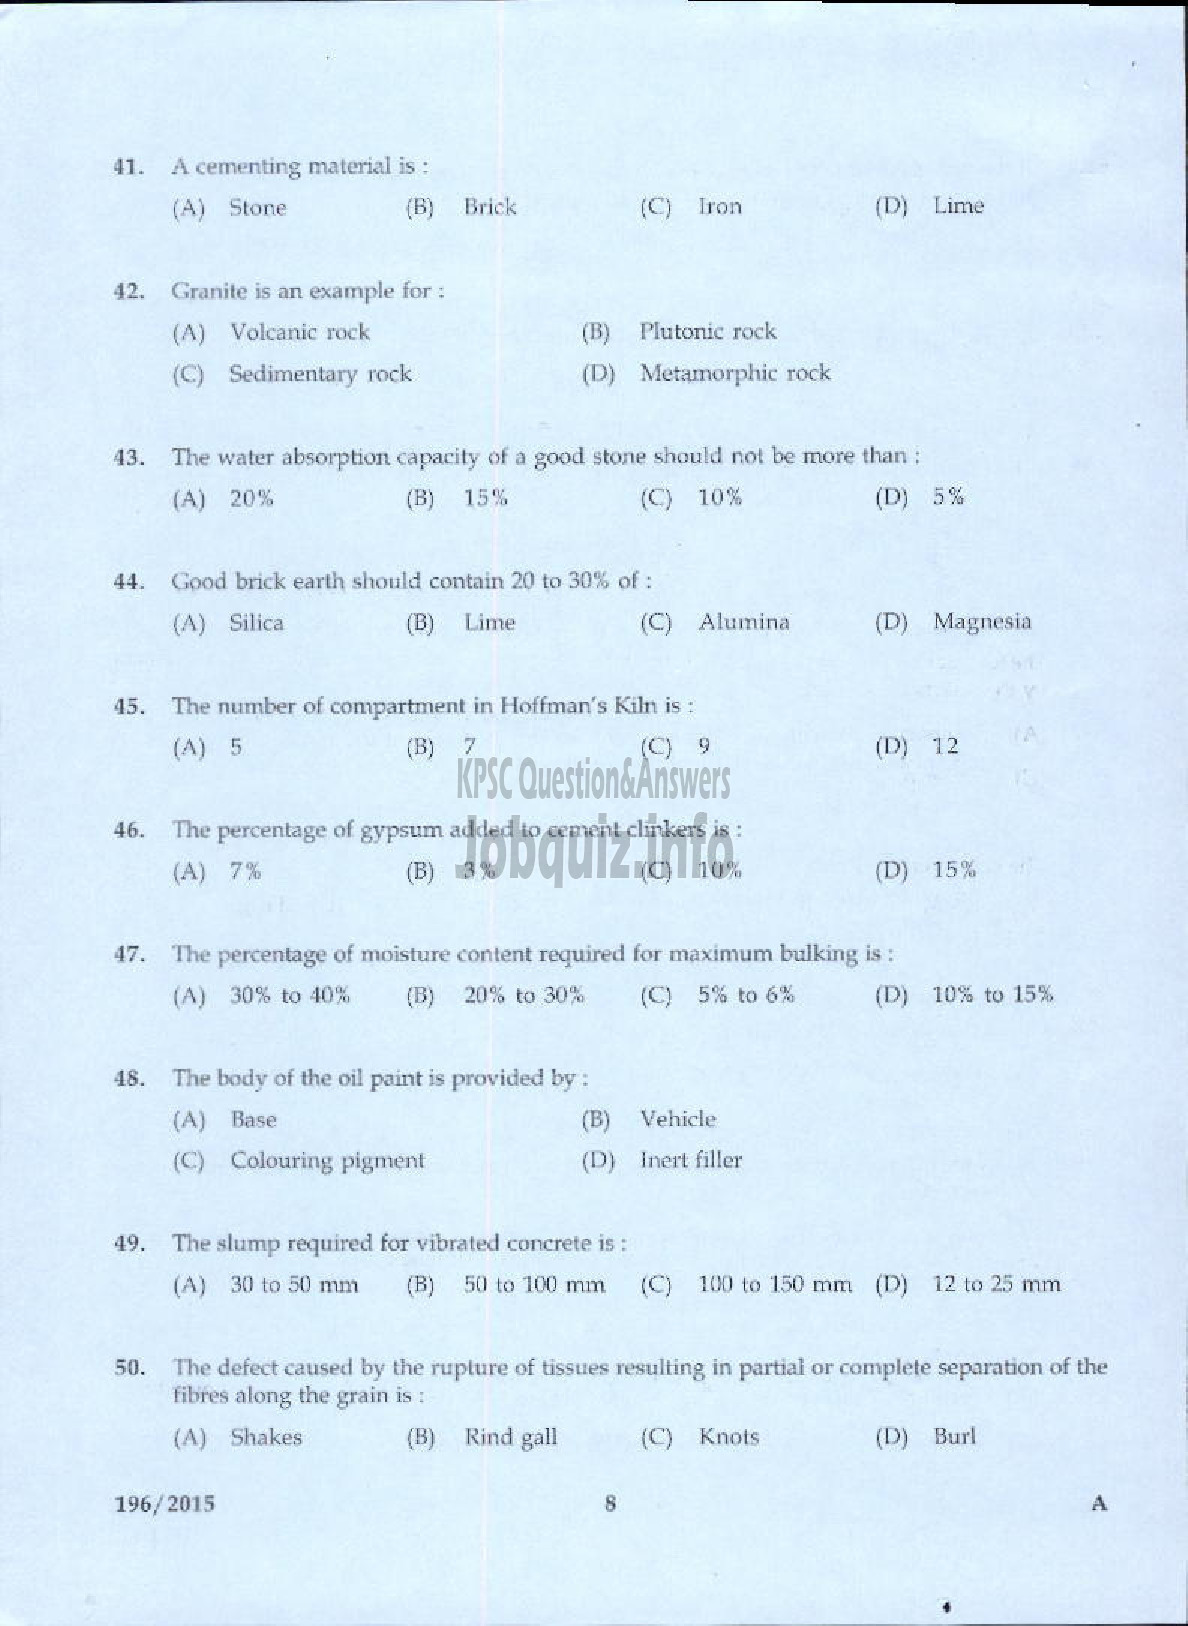 Kerala PSC Question Paper - DRAFTSMAN GR I/ TOWN PLANNING SURVEYOR GR I TOWN AND COUNTRY PLANNING-6